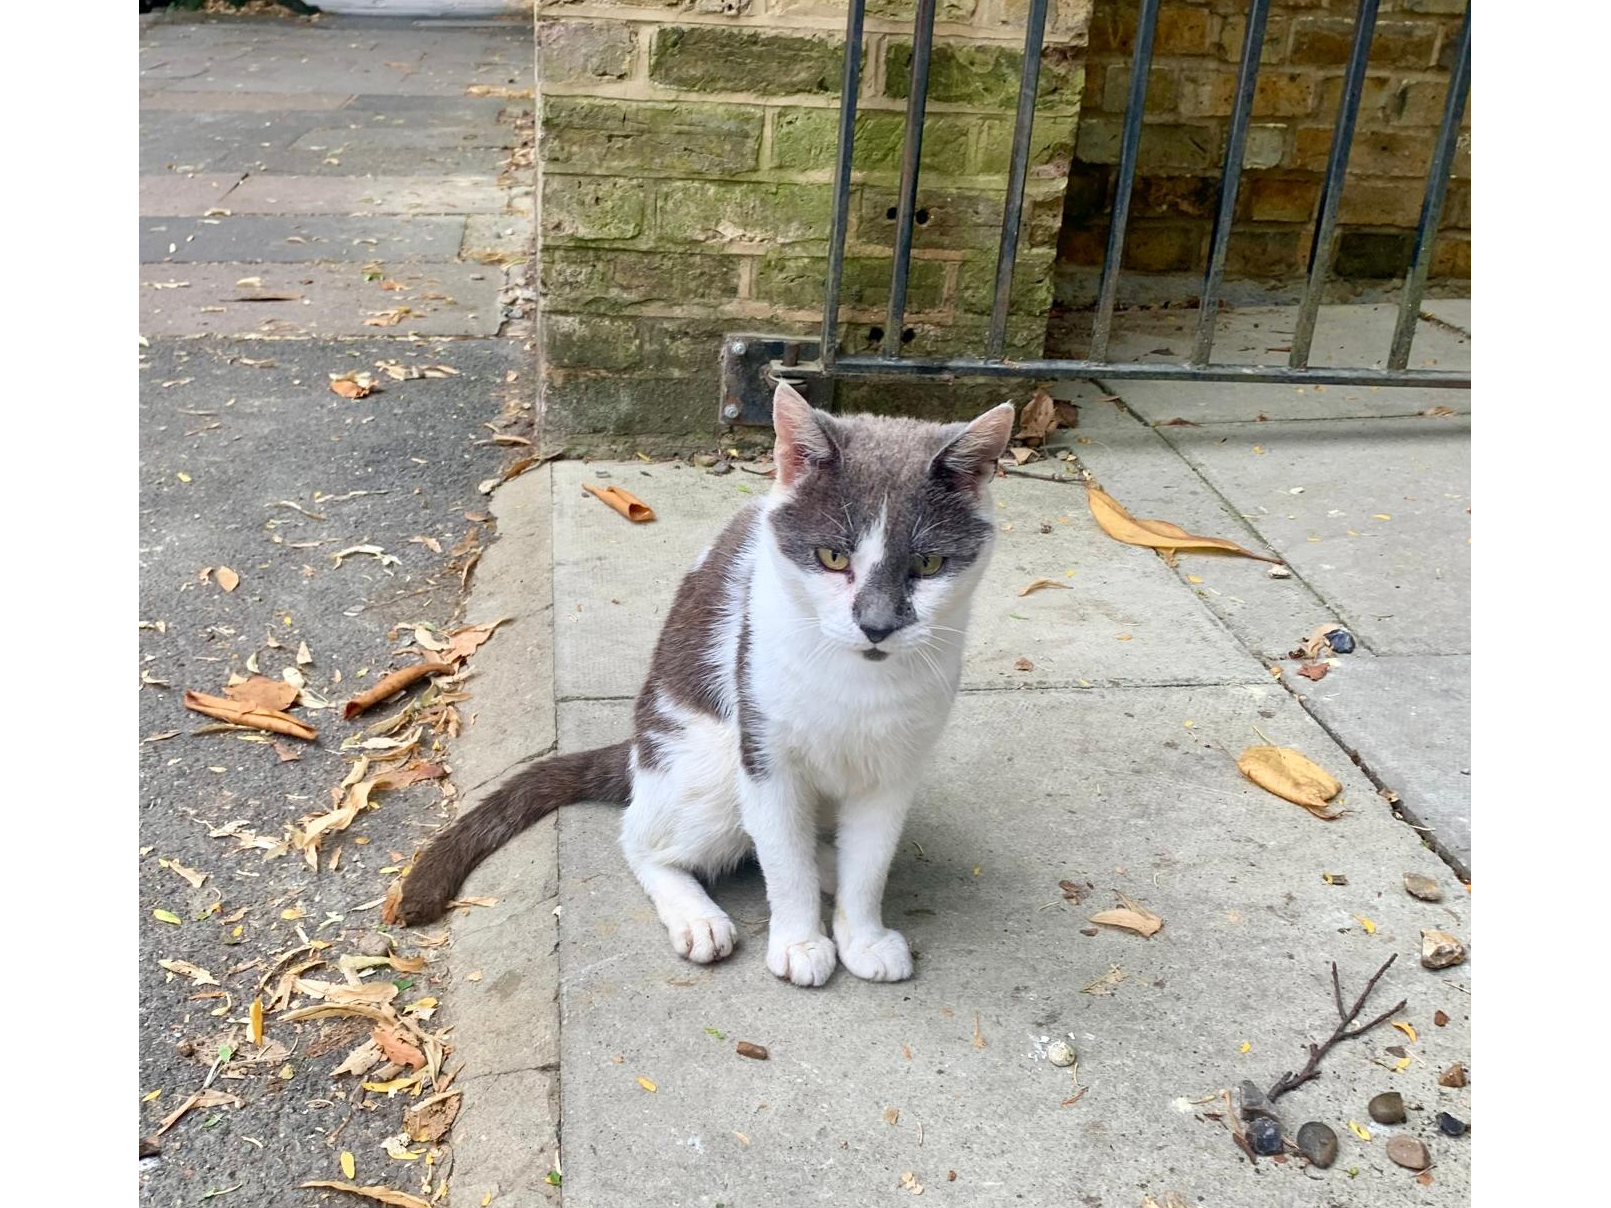 Do you recognise this cat?  Are you the owner?  A very friendly stray picked up in Bupa Dental Surgery in Mount Park Road, Ealing W5.  Somewhat thin and unkempt and with sun burnt ear tips.  But is a very friendly and social cat.  Please email or message if you know about him.